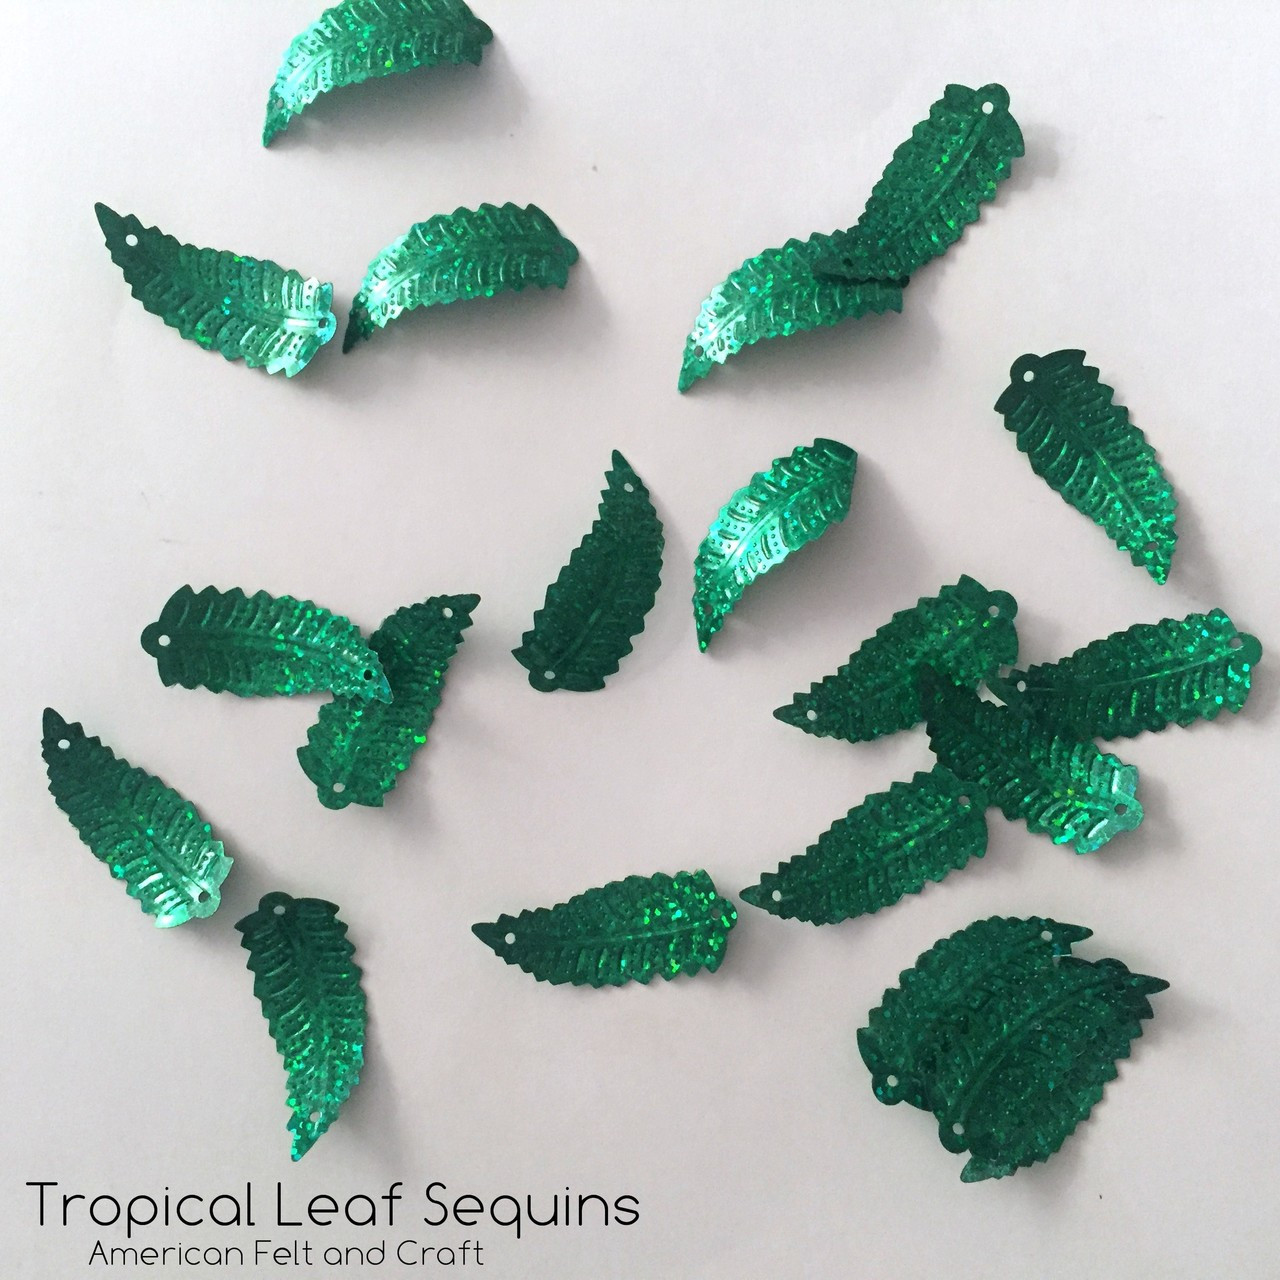 Green Glitter Fabric Super Sparkle Hand Cut Leaves No Hole Sew On Glue On  20mm - 50mm